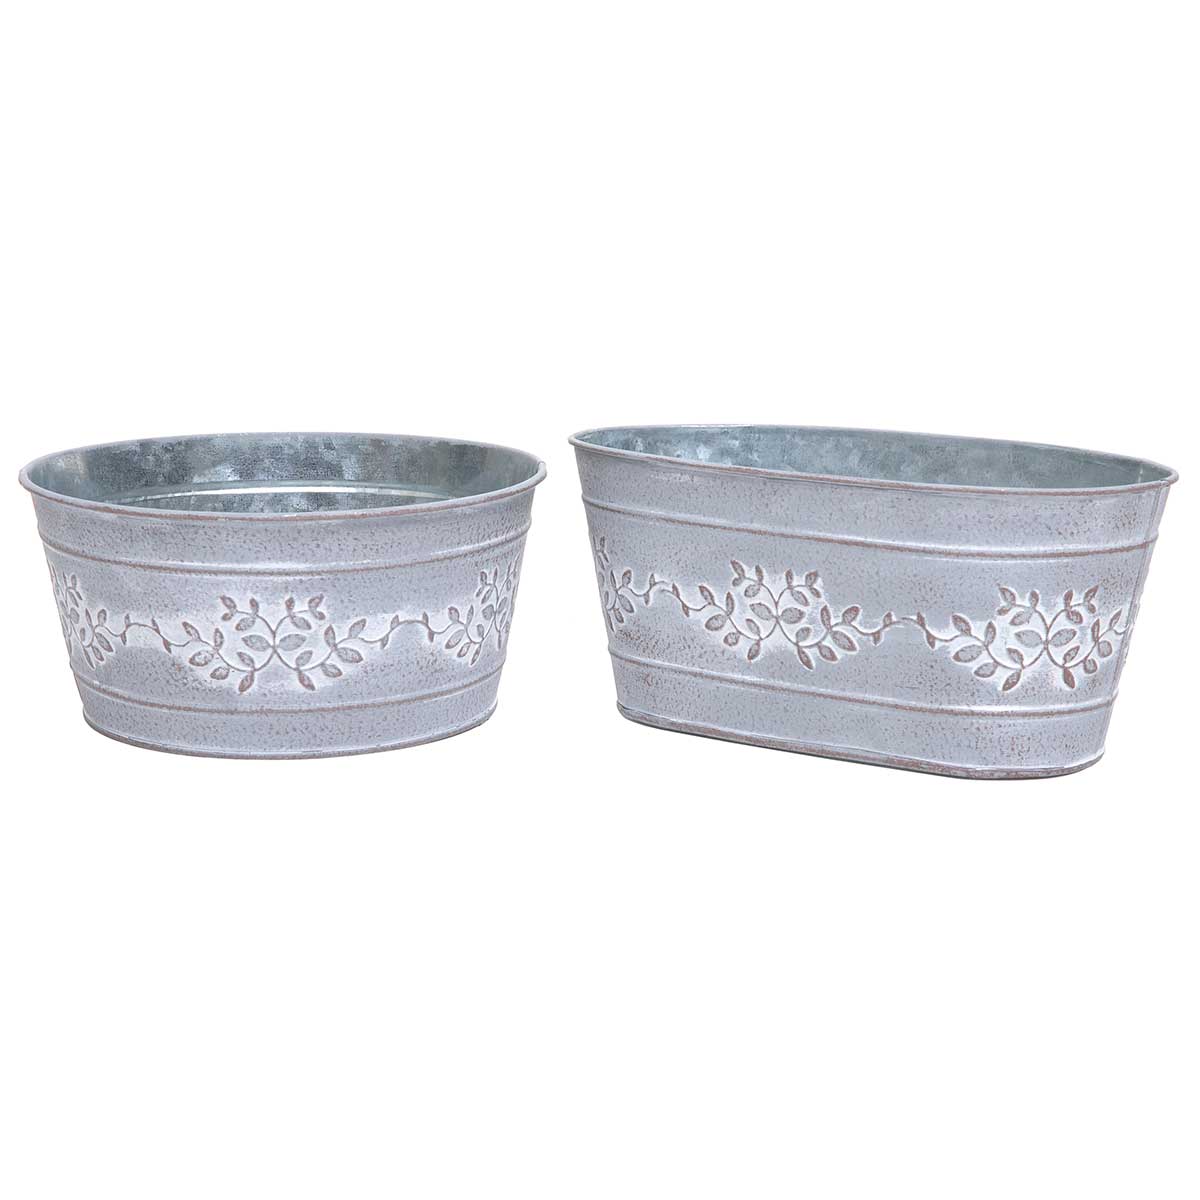 BUCKET PRIVET GREY OVAL 9.25IN X 5.25IN X 4.25IN METAL - Click Image to Close